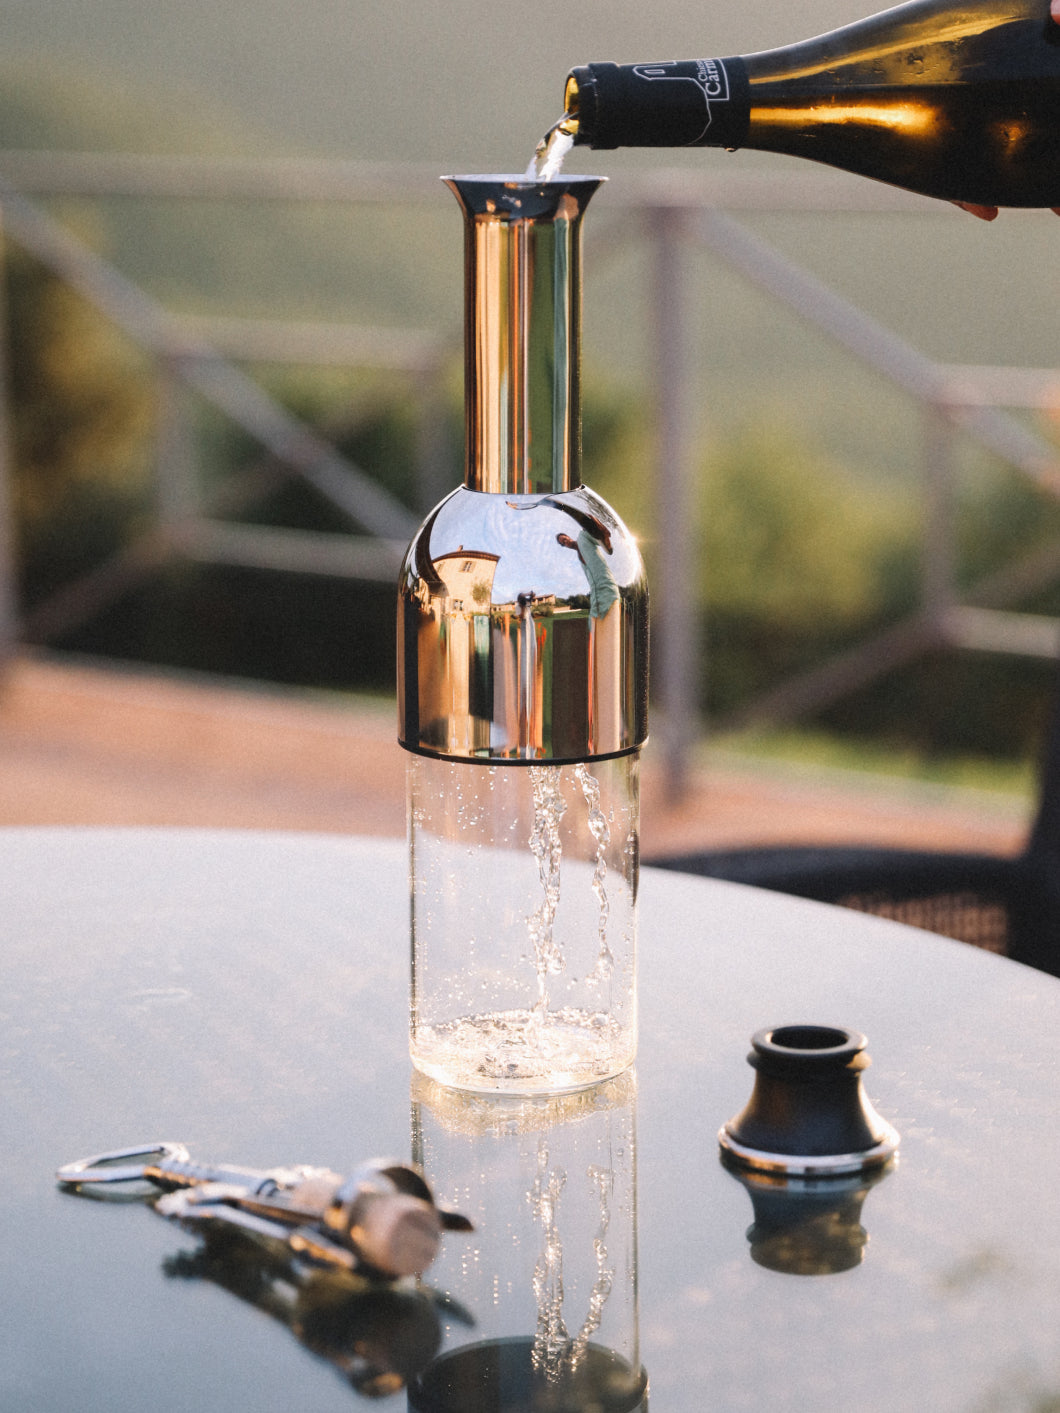 eto wine decanter in Stainless: mirror finish